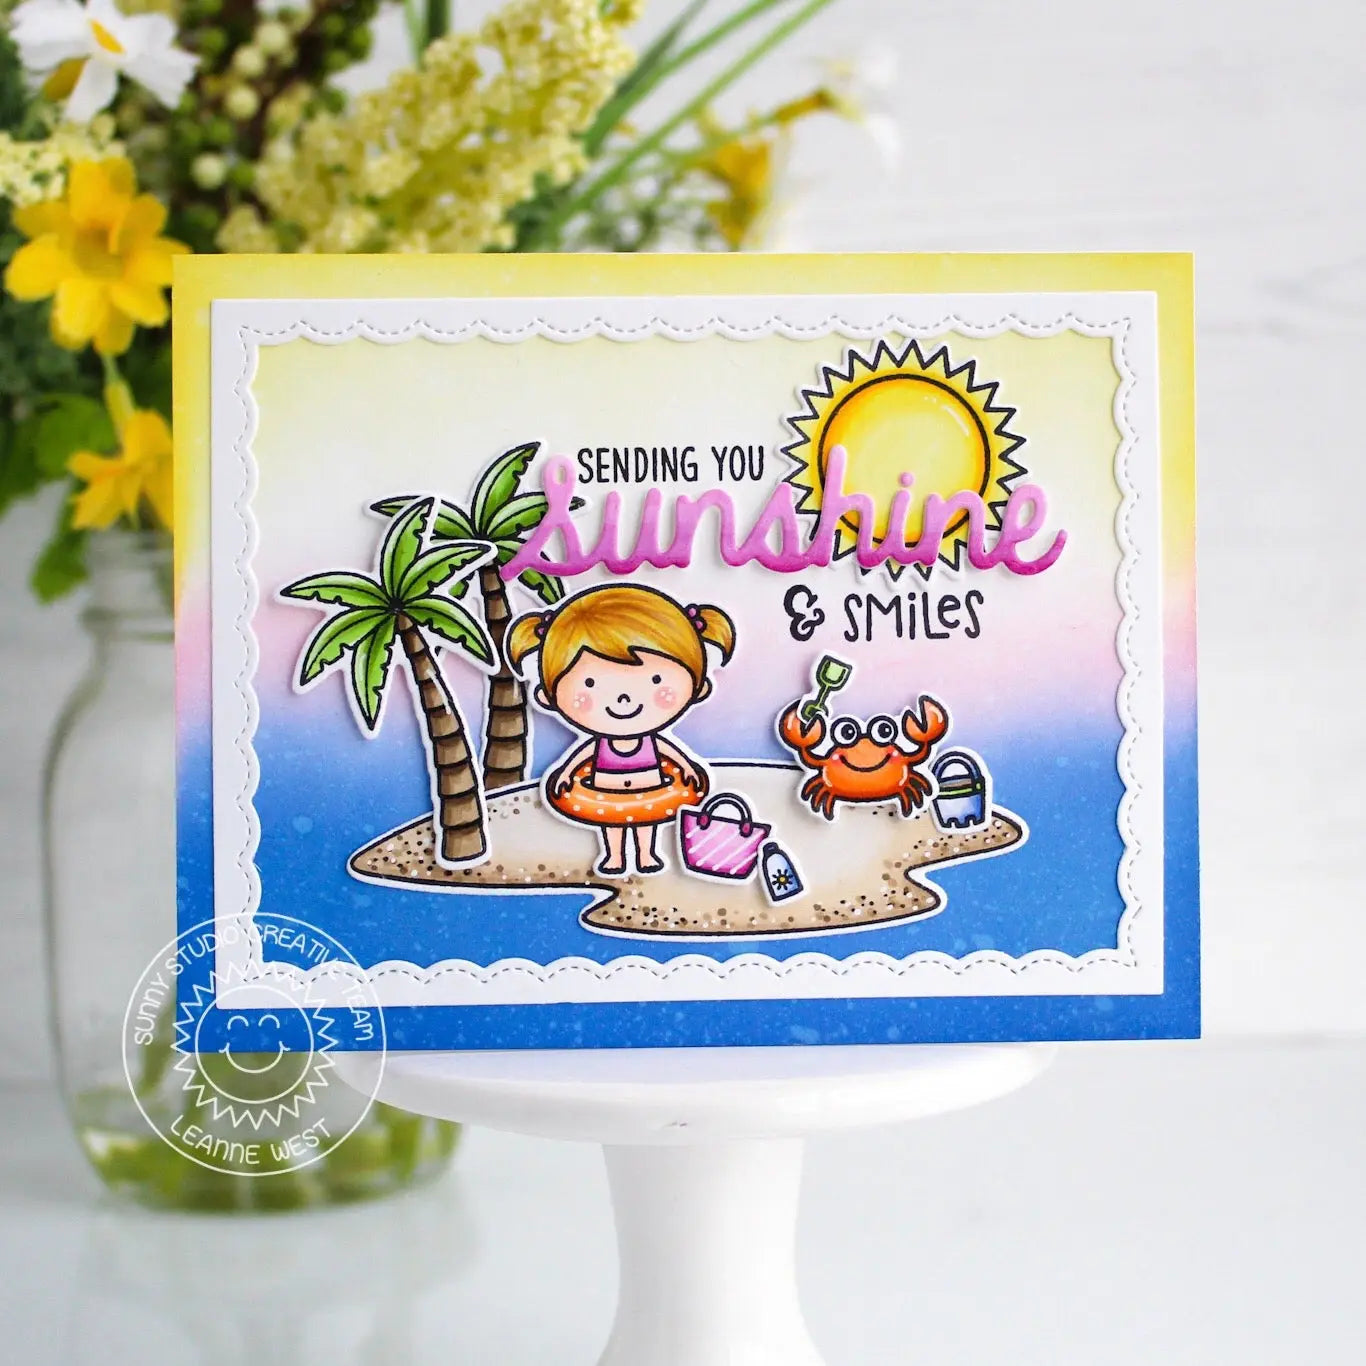 Sunny Studio Sending Sunshine & Smiles Girl with Crab on Island Summer Card by Leanne West (using Beach Babies Clear Stamps)